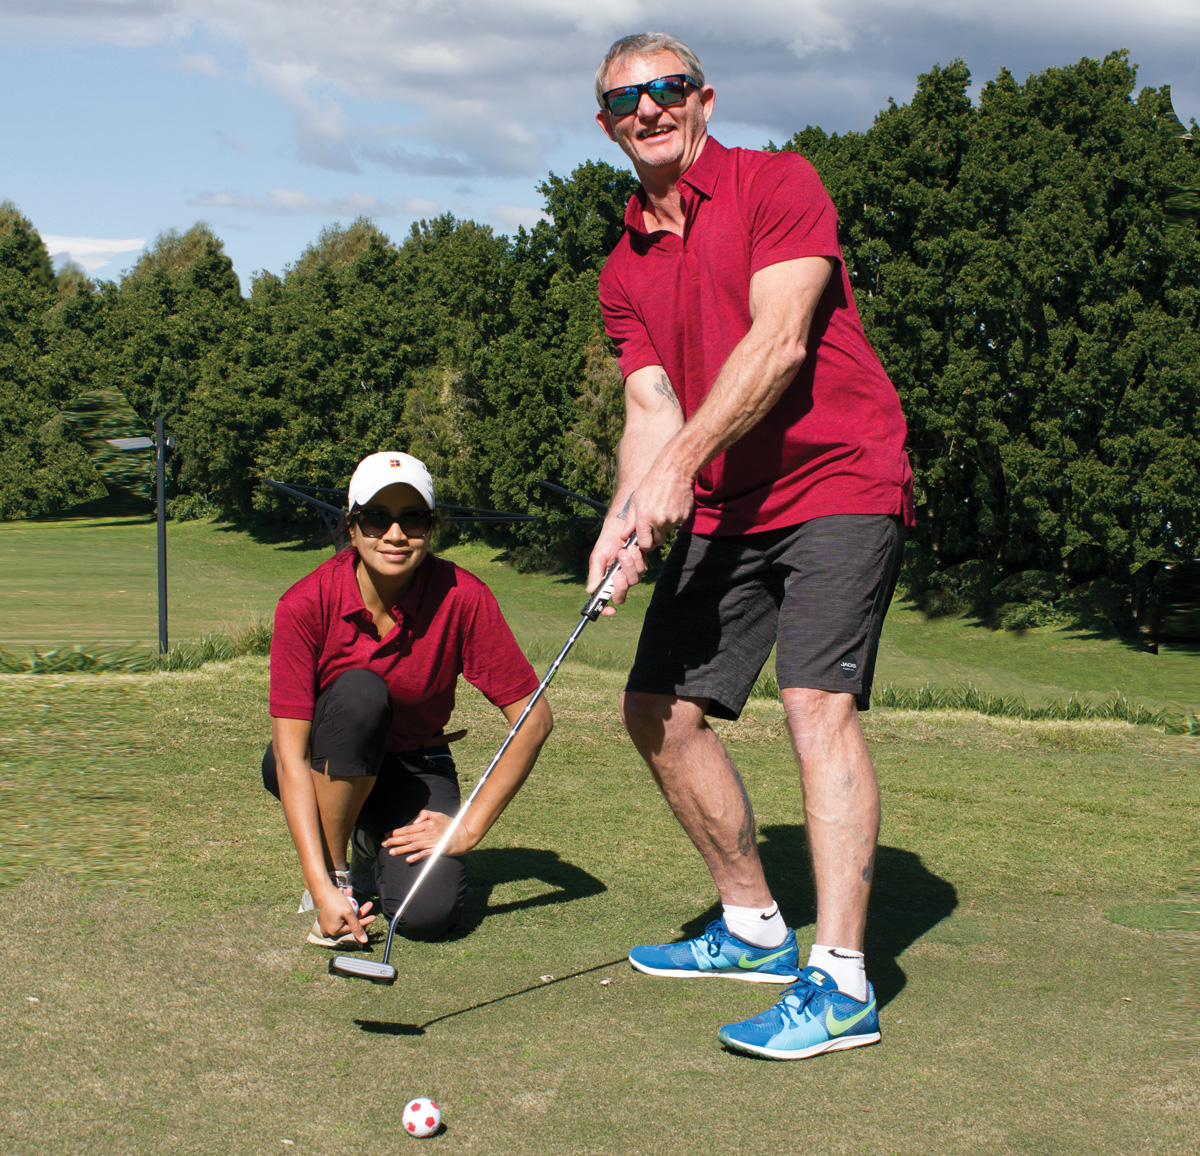 a blind golf caddy kneeling down behind a smiling and very handsome and fit blind golfer.